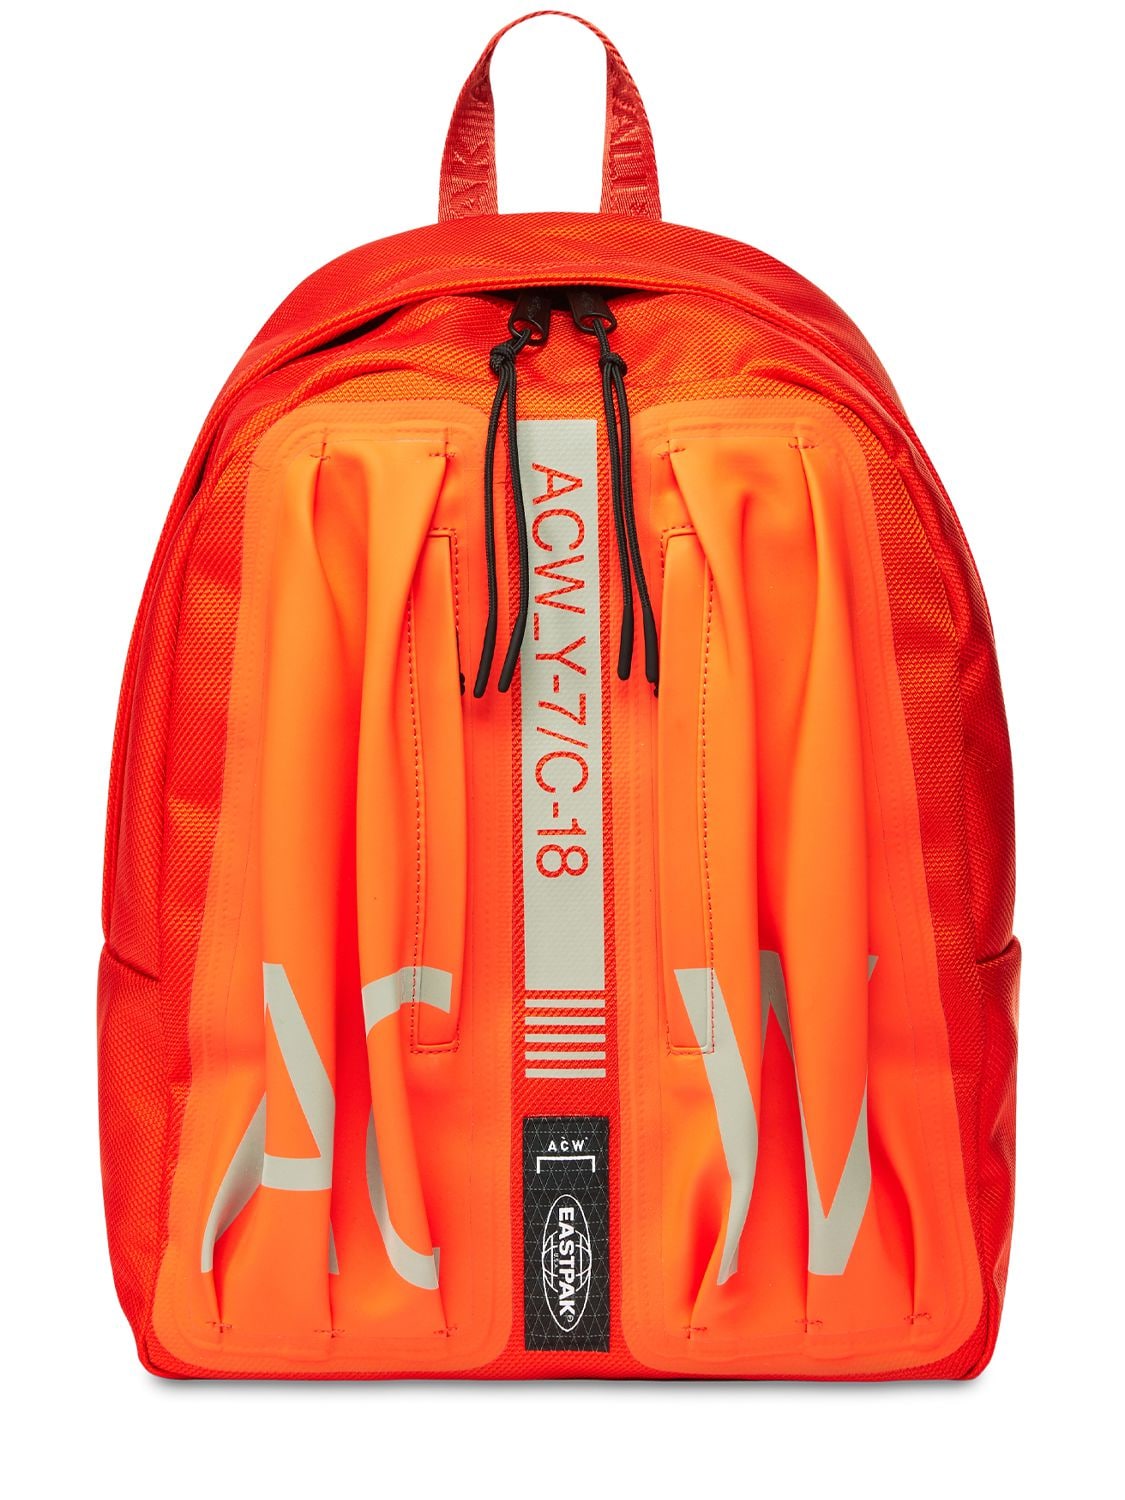 A-cold-wall* X Eastpak Nylon Backpack